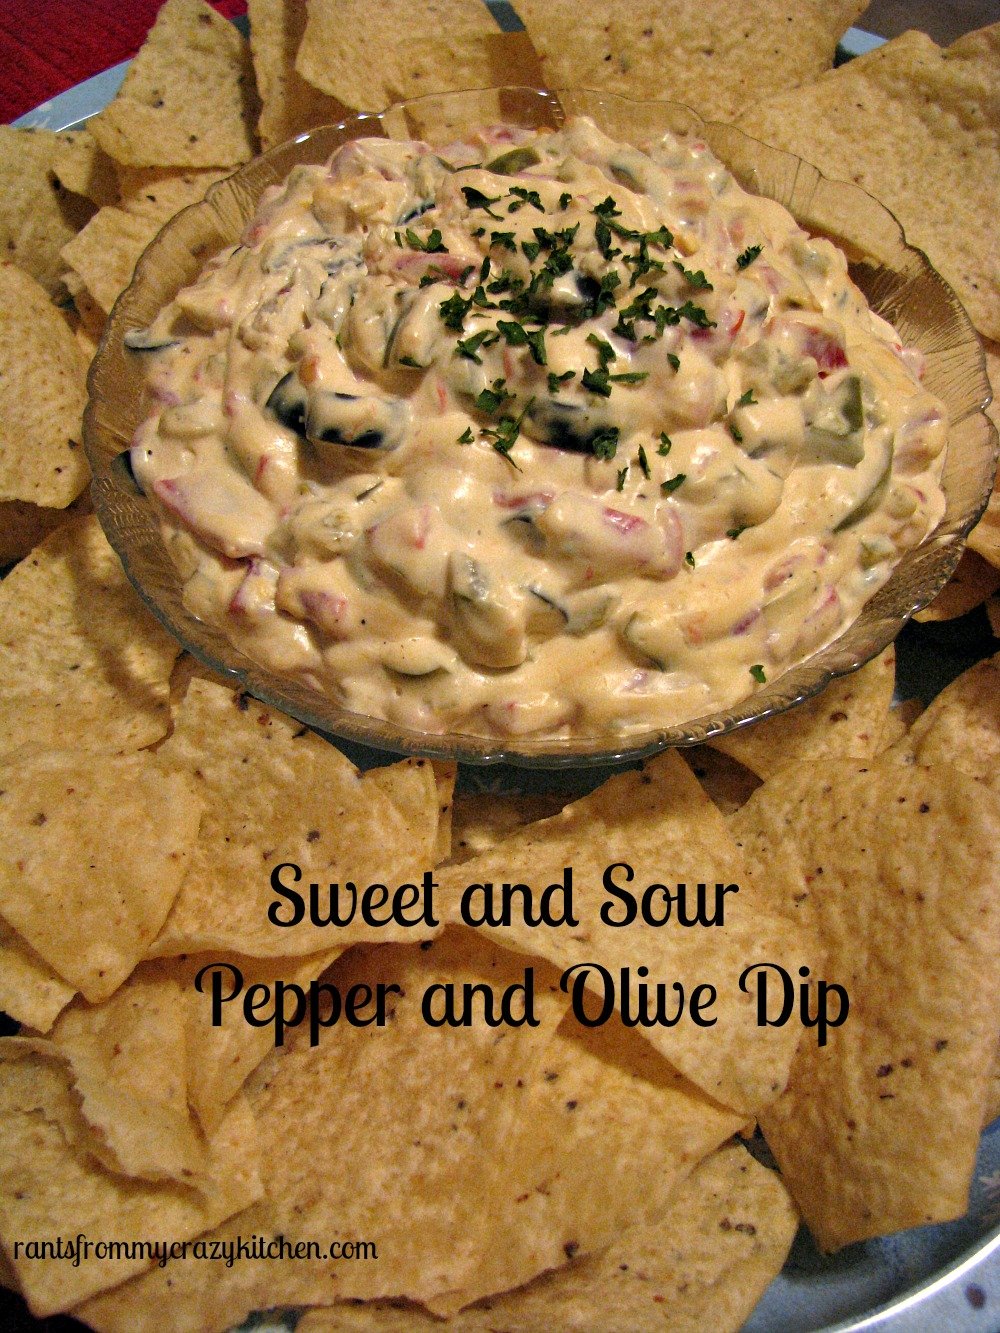 Sweet and Sour Pepper and Olive Dip